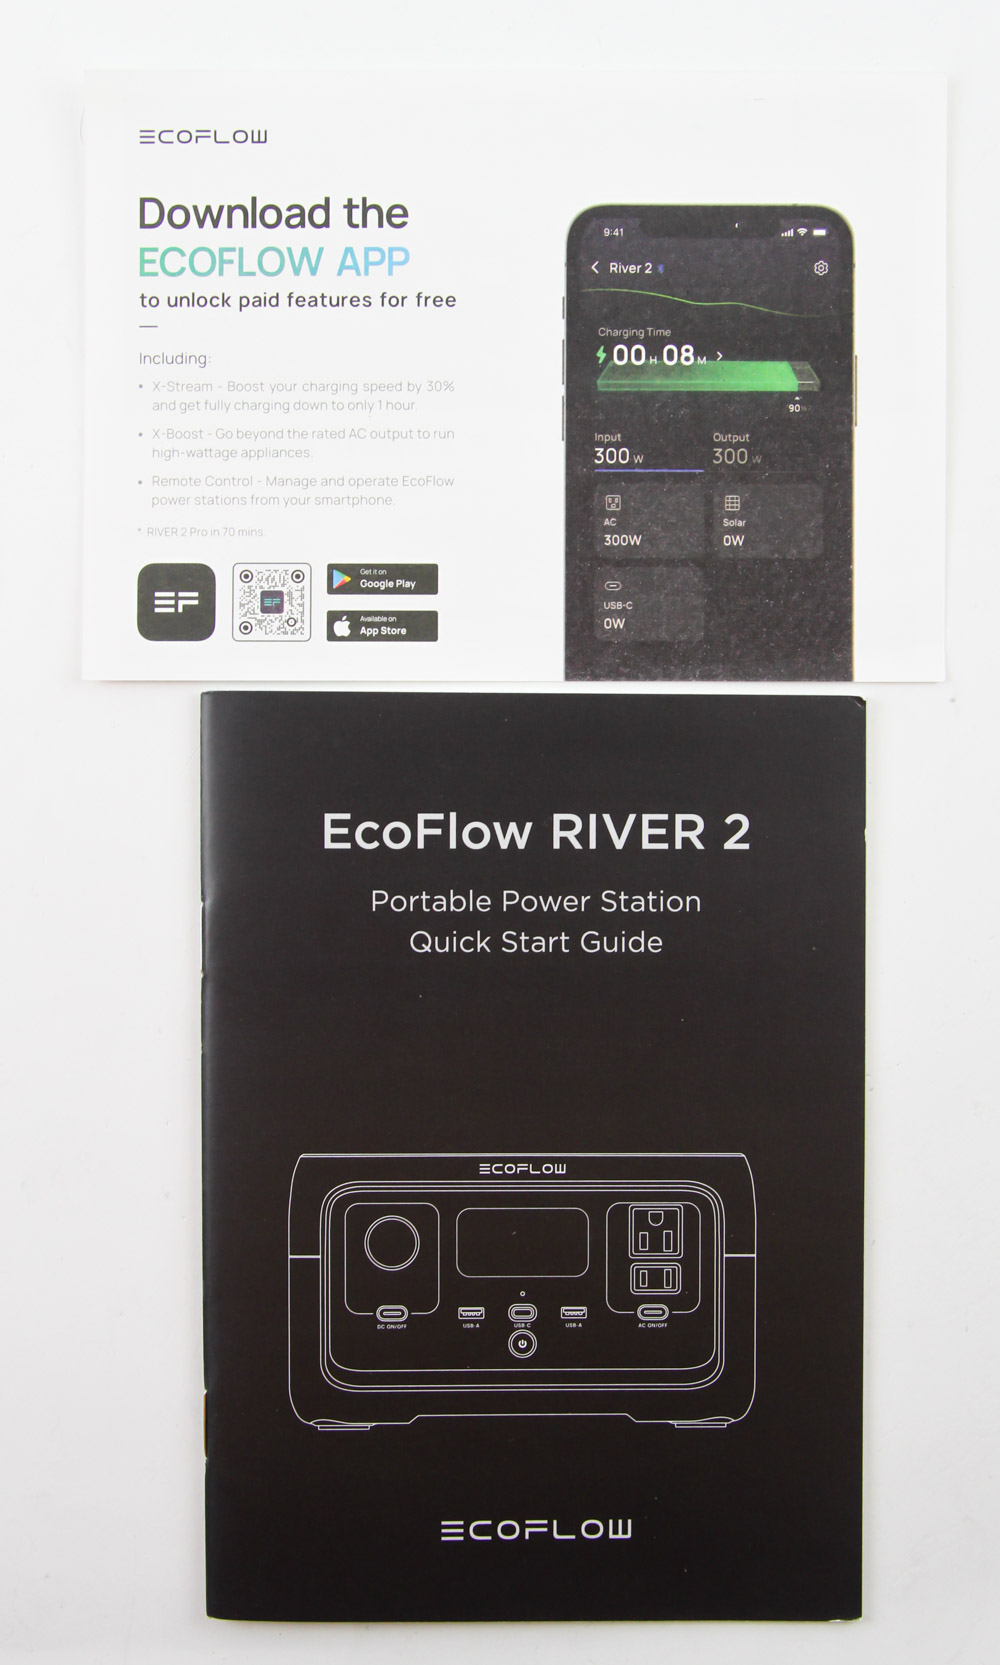 Ecoflow River 2 Max review: All-in-one power station for creators on the go